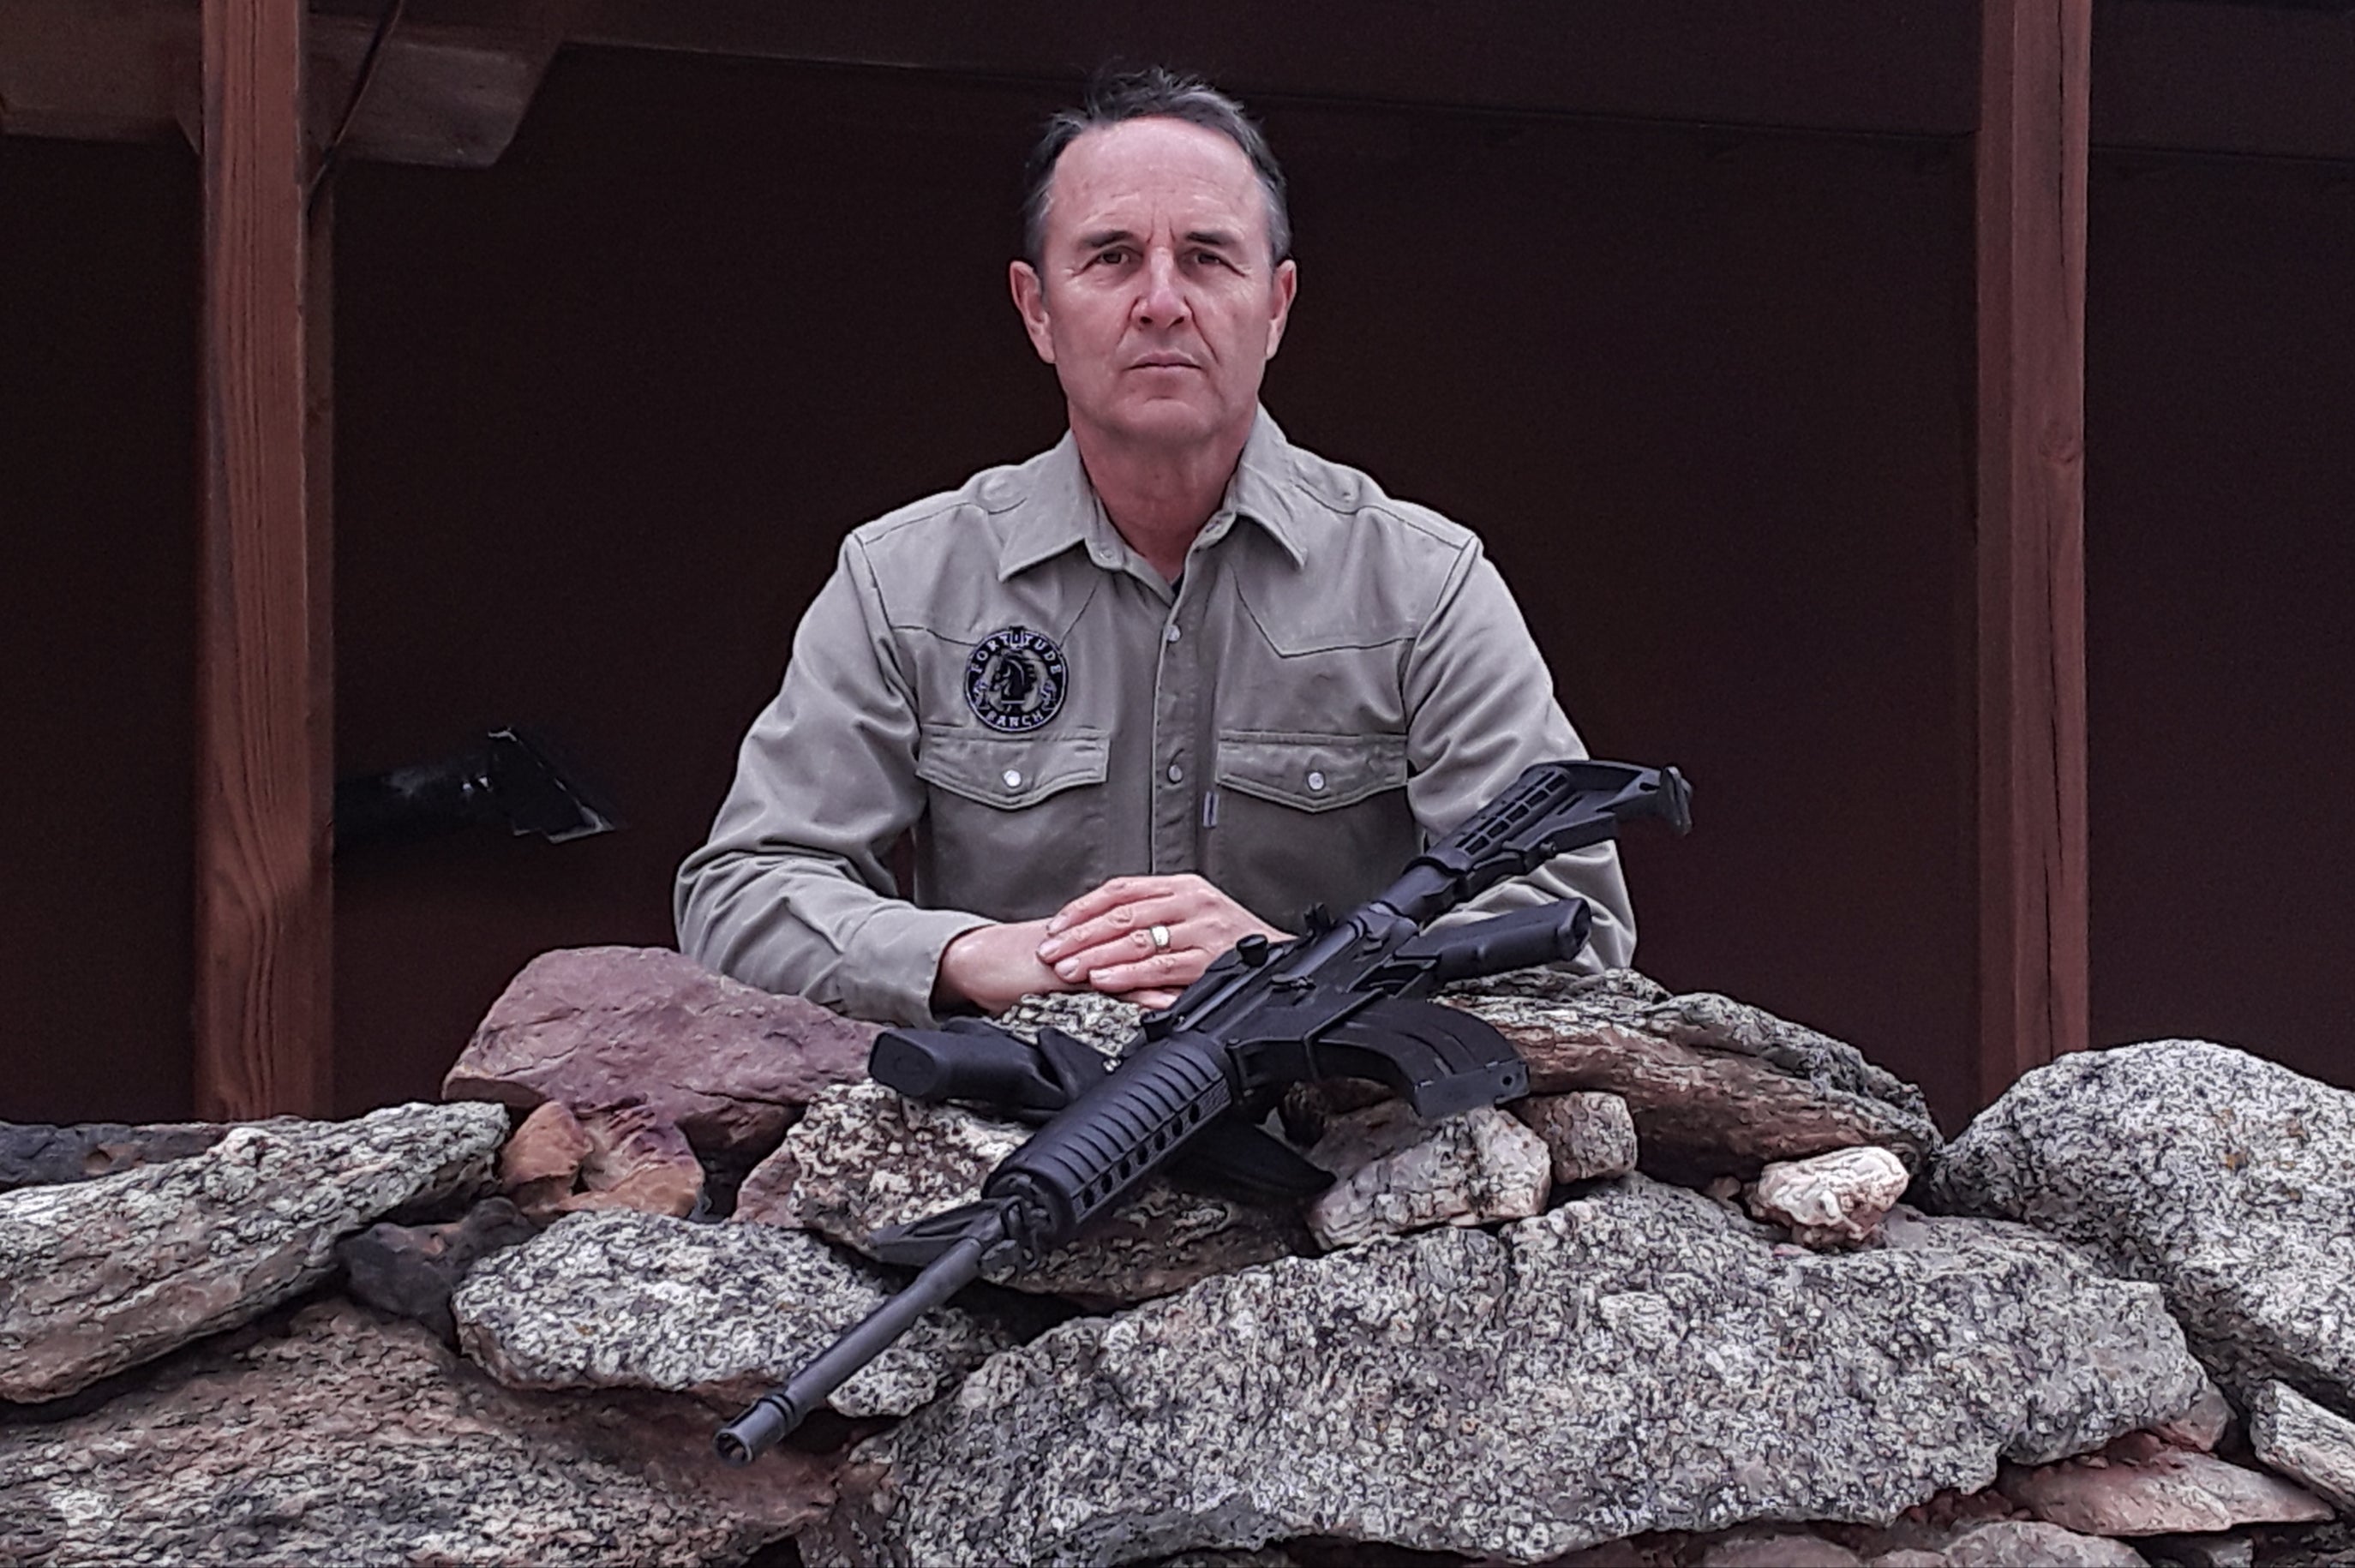 Drew Miller, founder of the survival company Fortitude Ranch